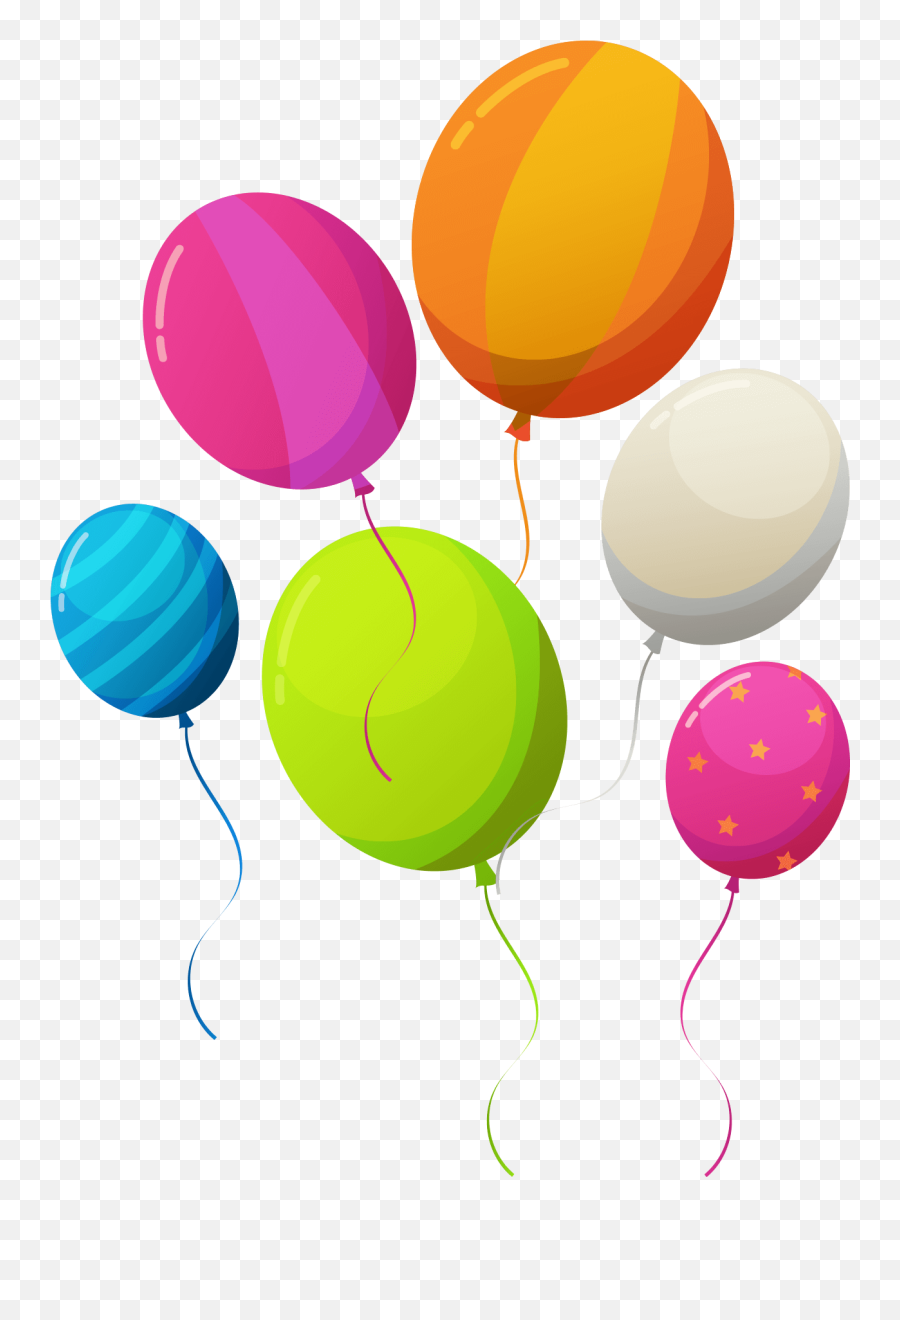 Balloons Clipart Png Image Free Download Searchpngcom - Balloon Emoji,Balloon Clipart